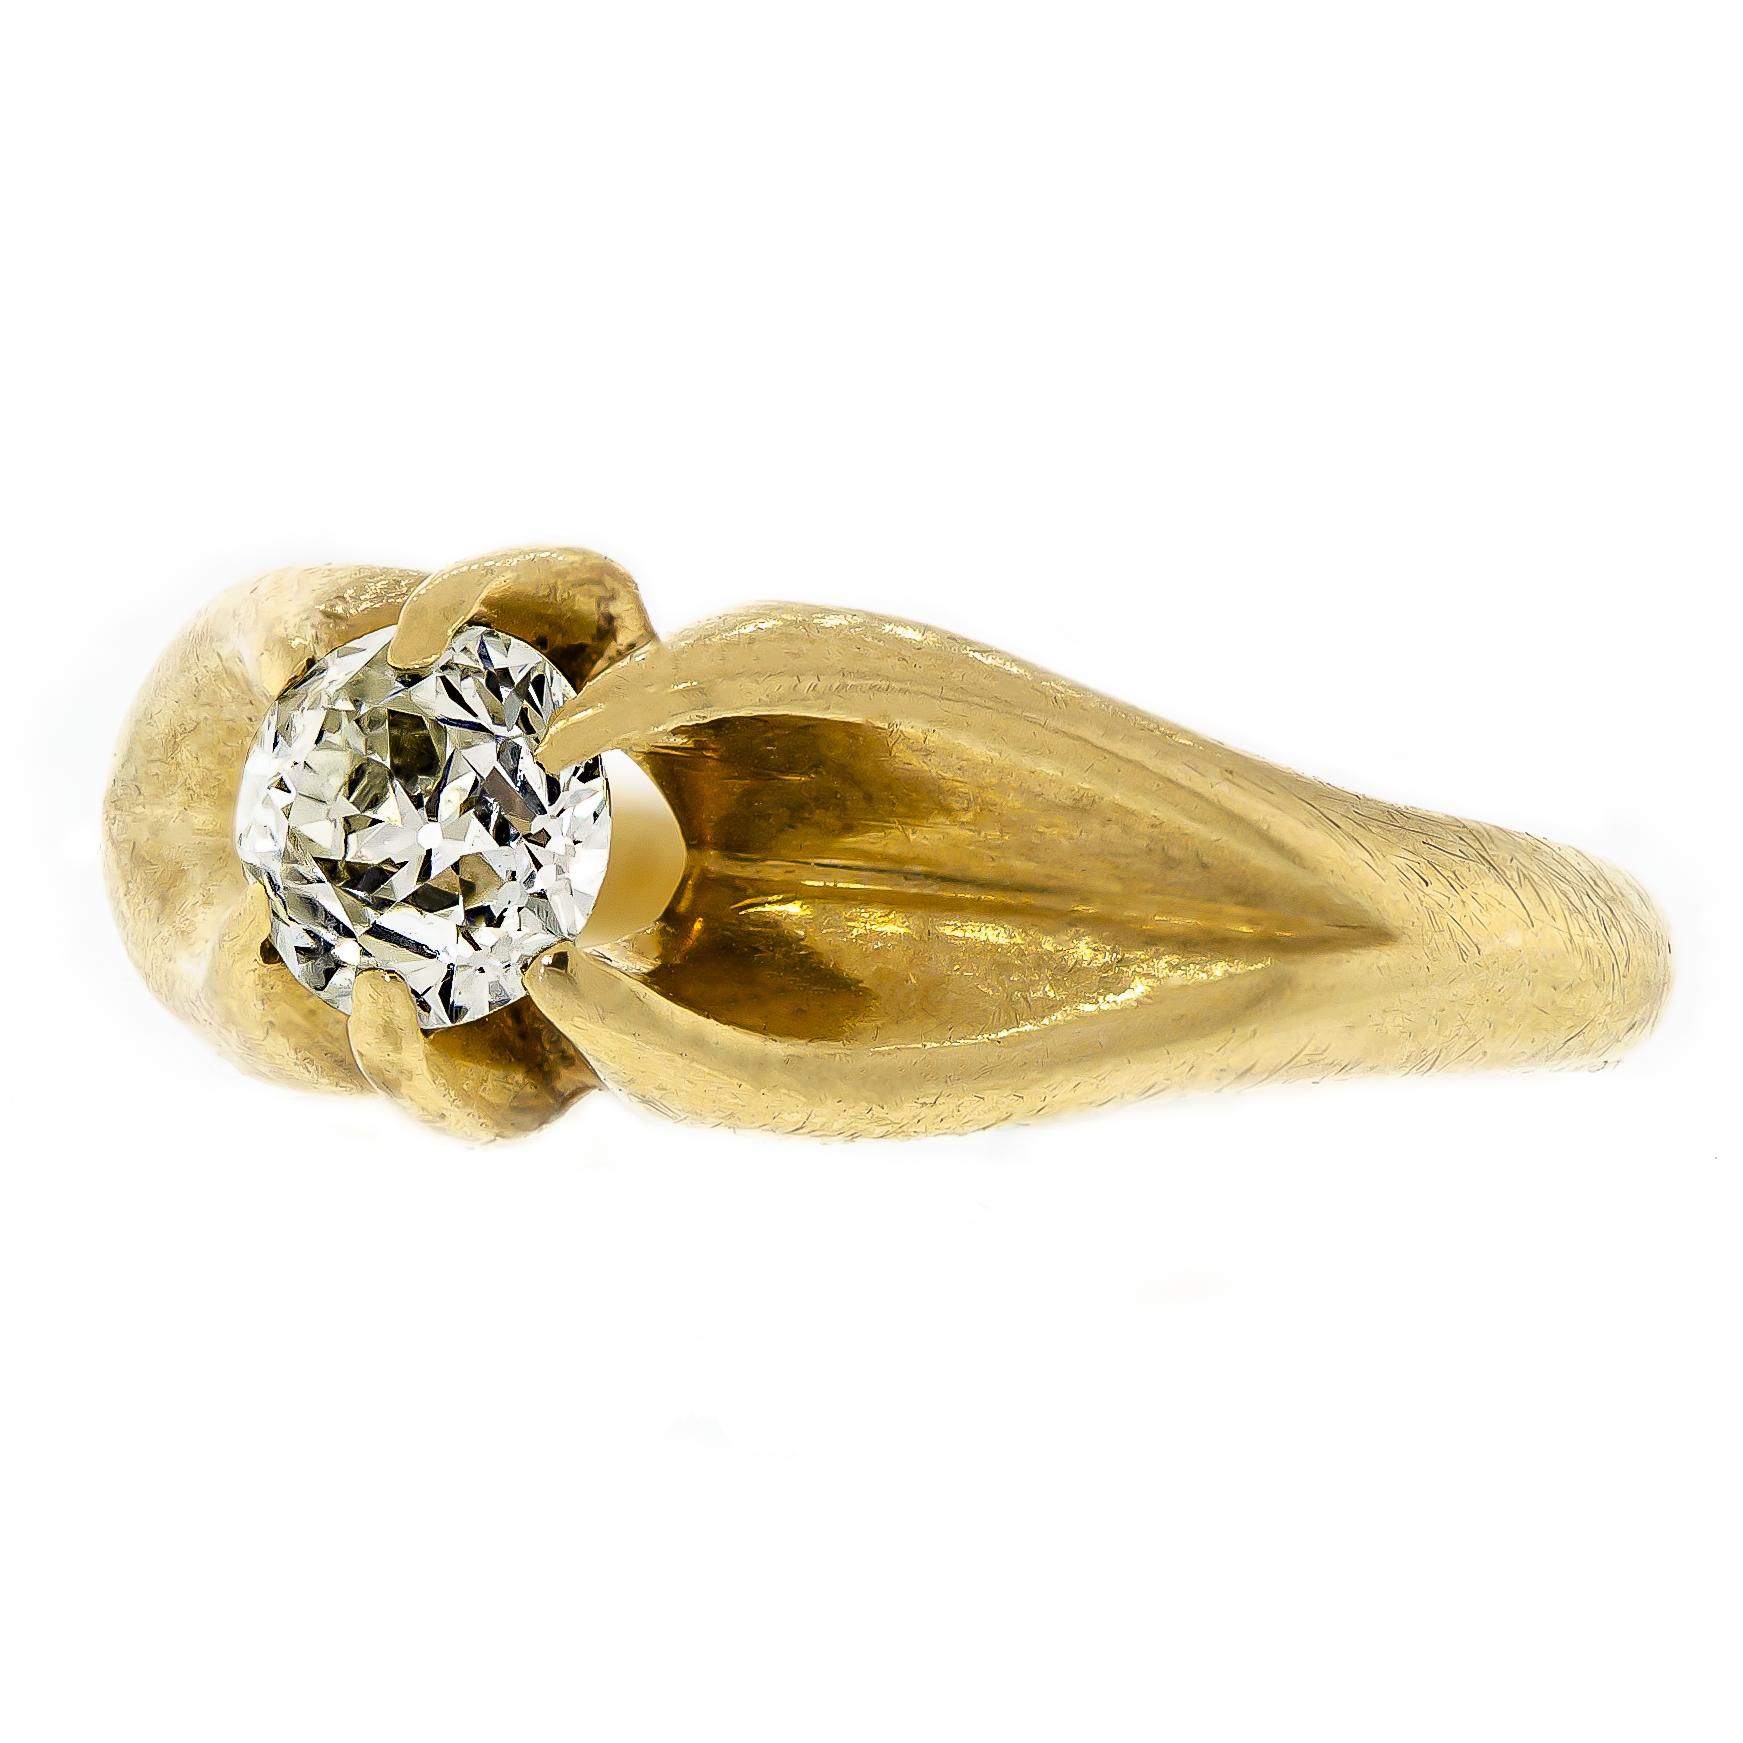 Attractive Victorian Circa 1895 14kt yellow gold and diamond ring set with one (1) Old European Cut diamond approximately 0.50ct, VS2, HIJ color, typical large culet small table and out of round diameter. Clean, bright stone. Belcher set. Great